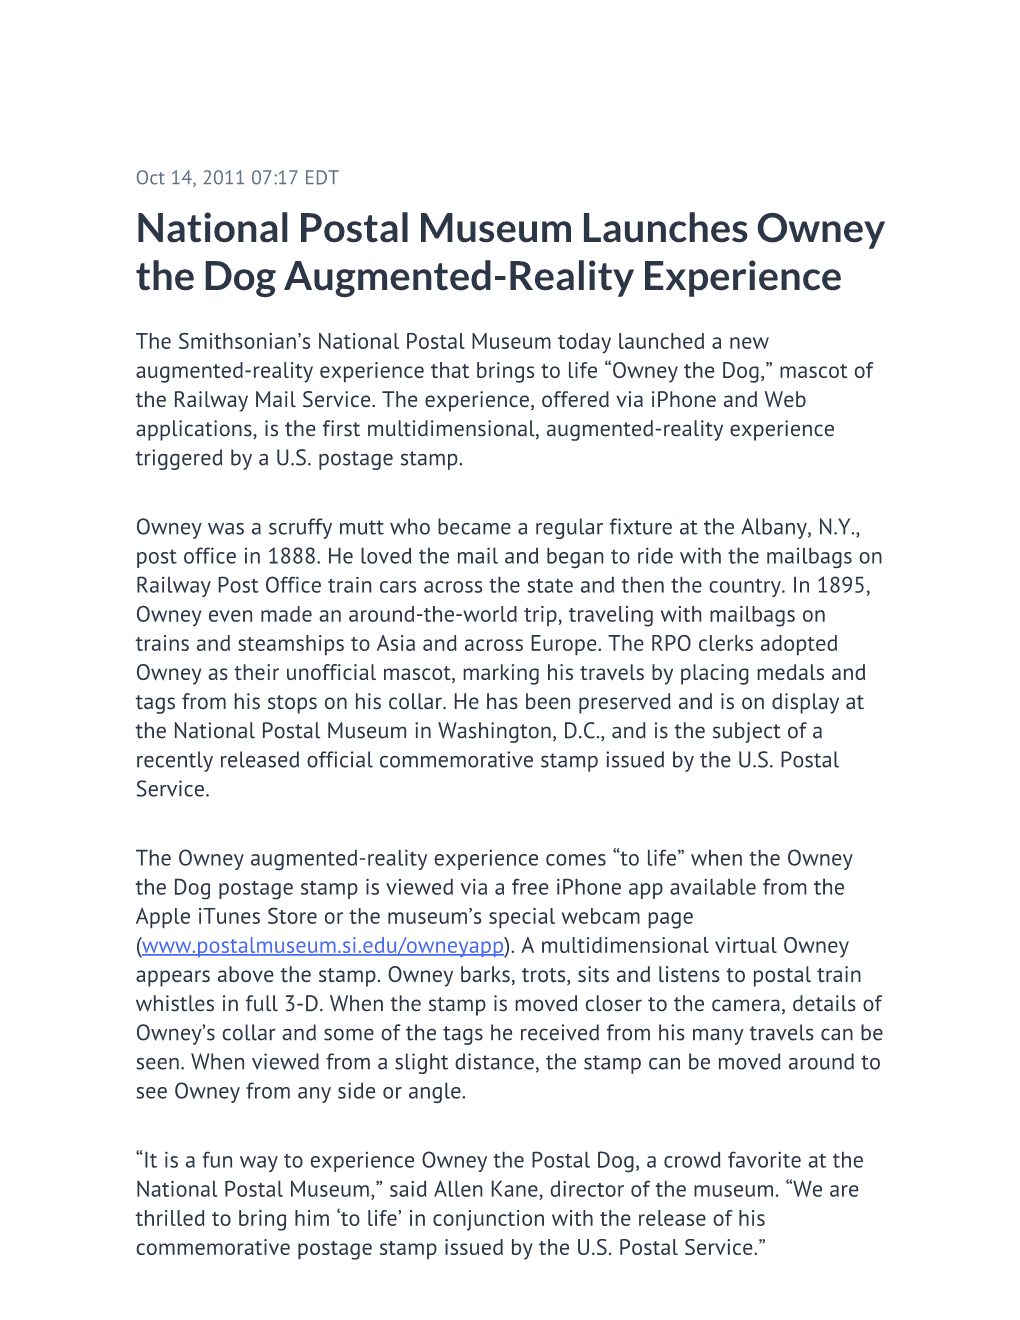 National Postal Museum Launches Owney the Dog Augmented-Reality Experience